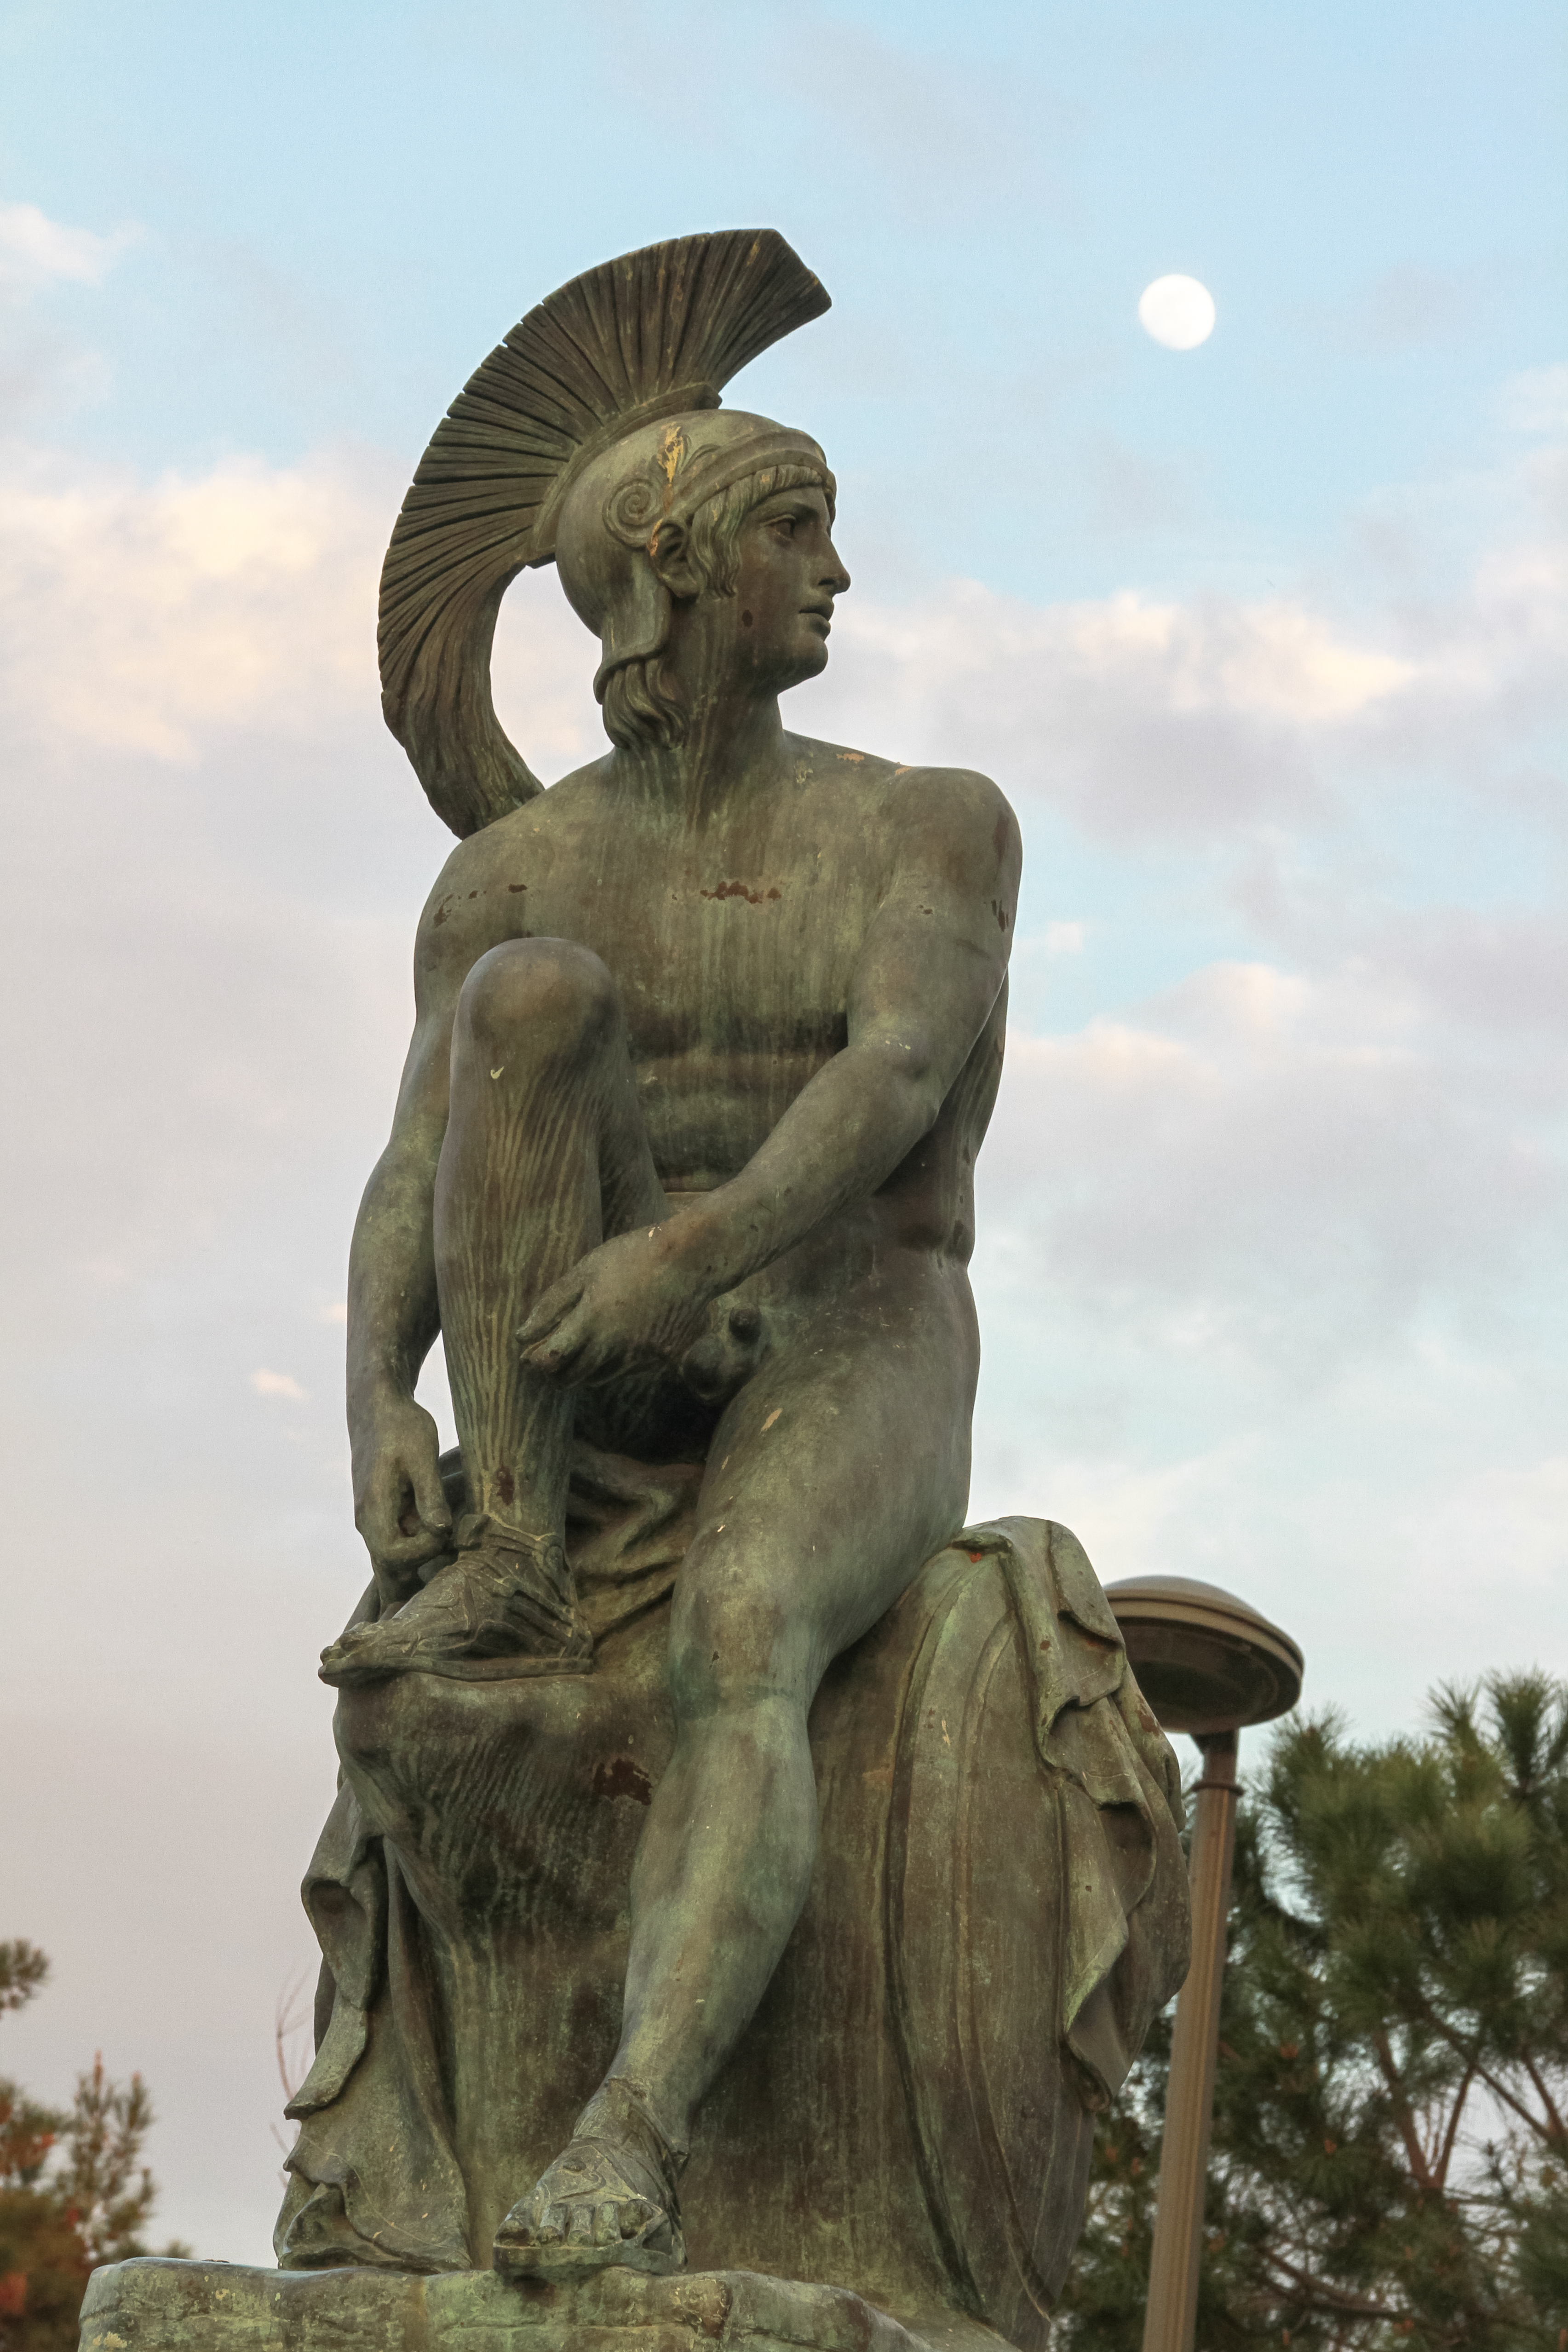 Image of a statue of Ares